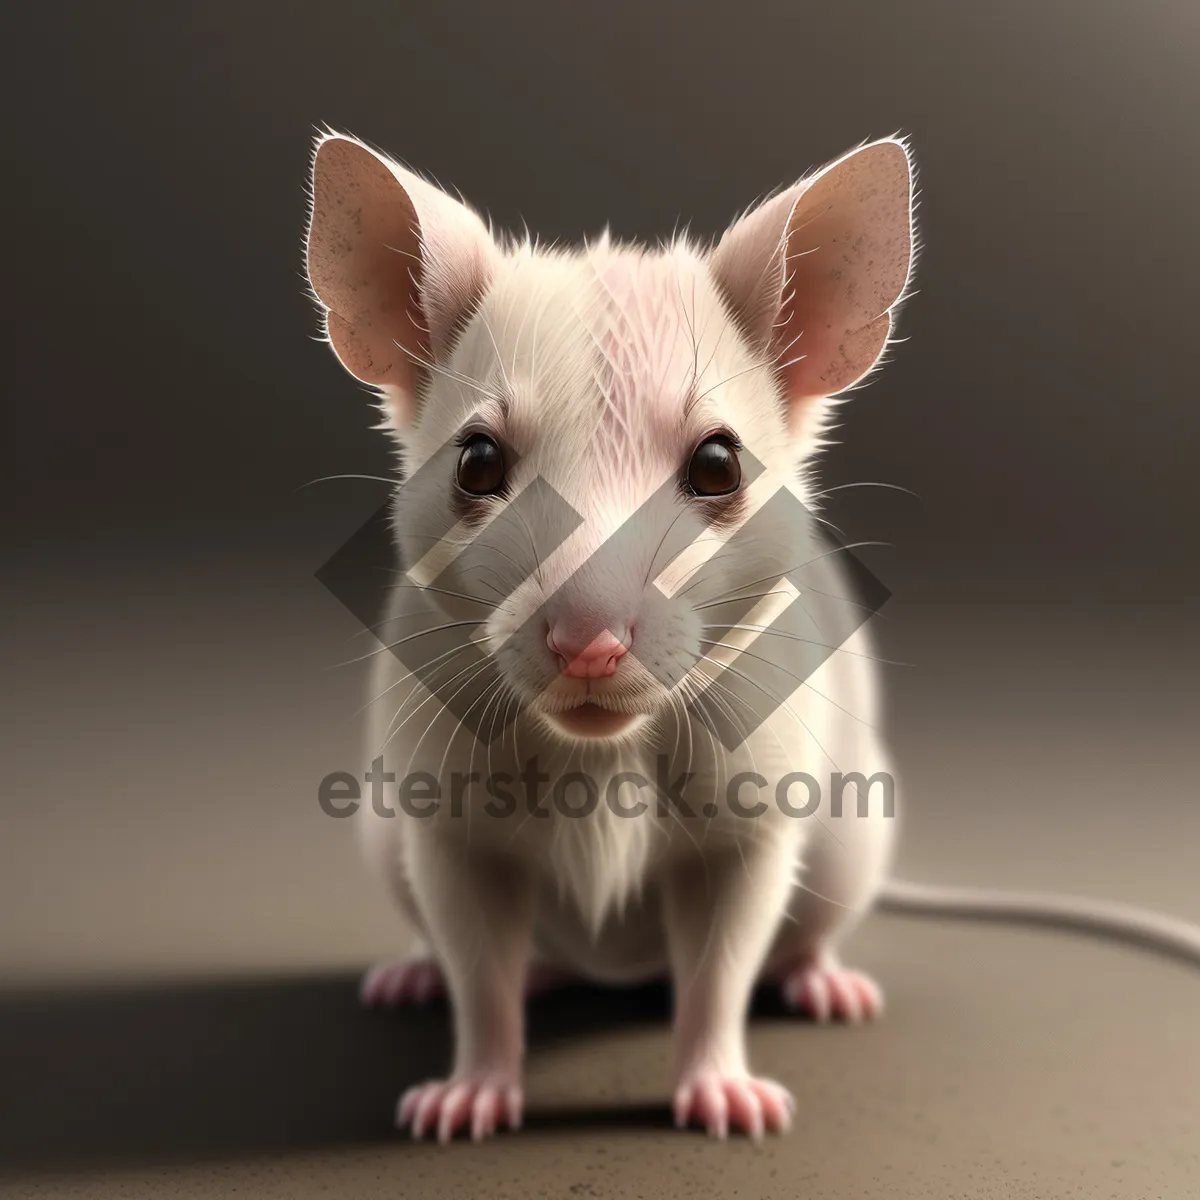 Picture of Furry Friend with Floppy Ears - Cute Domestic Mouse